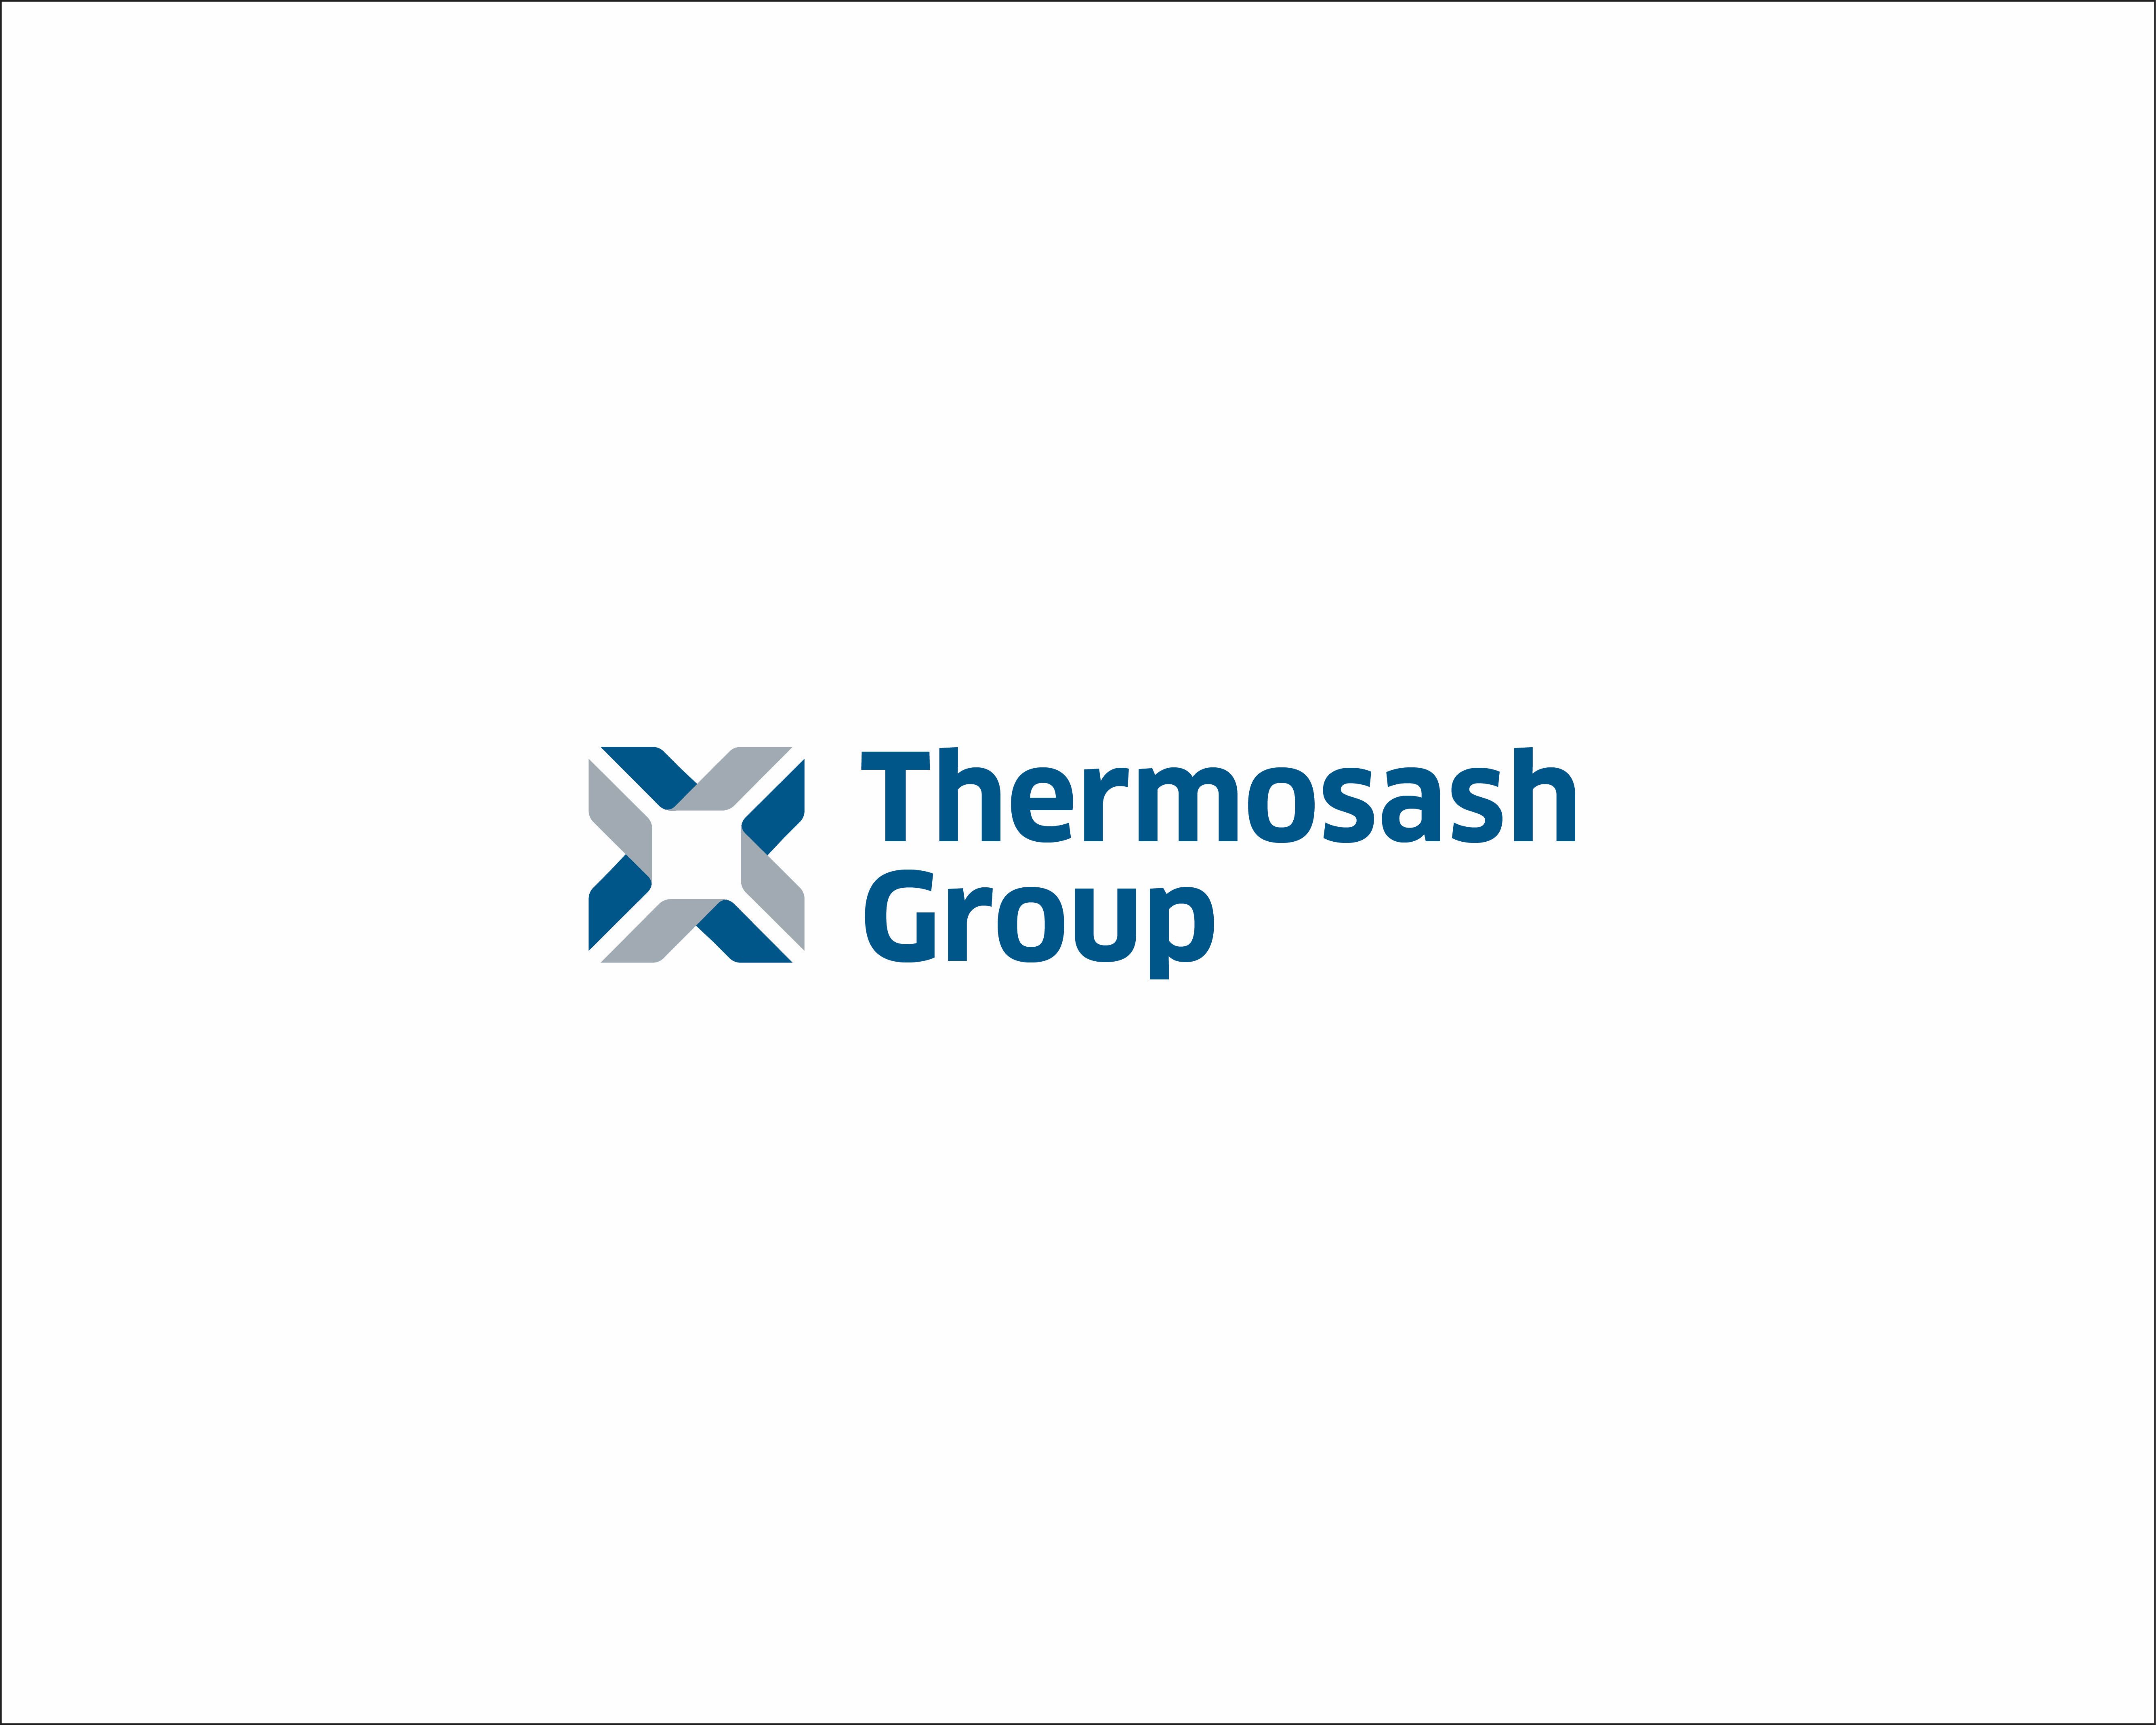 Thermosash Group